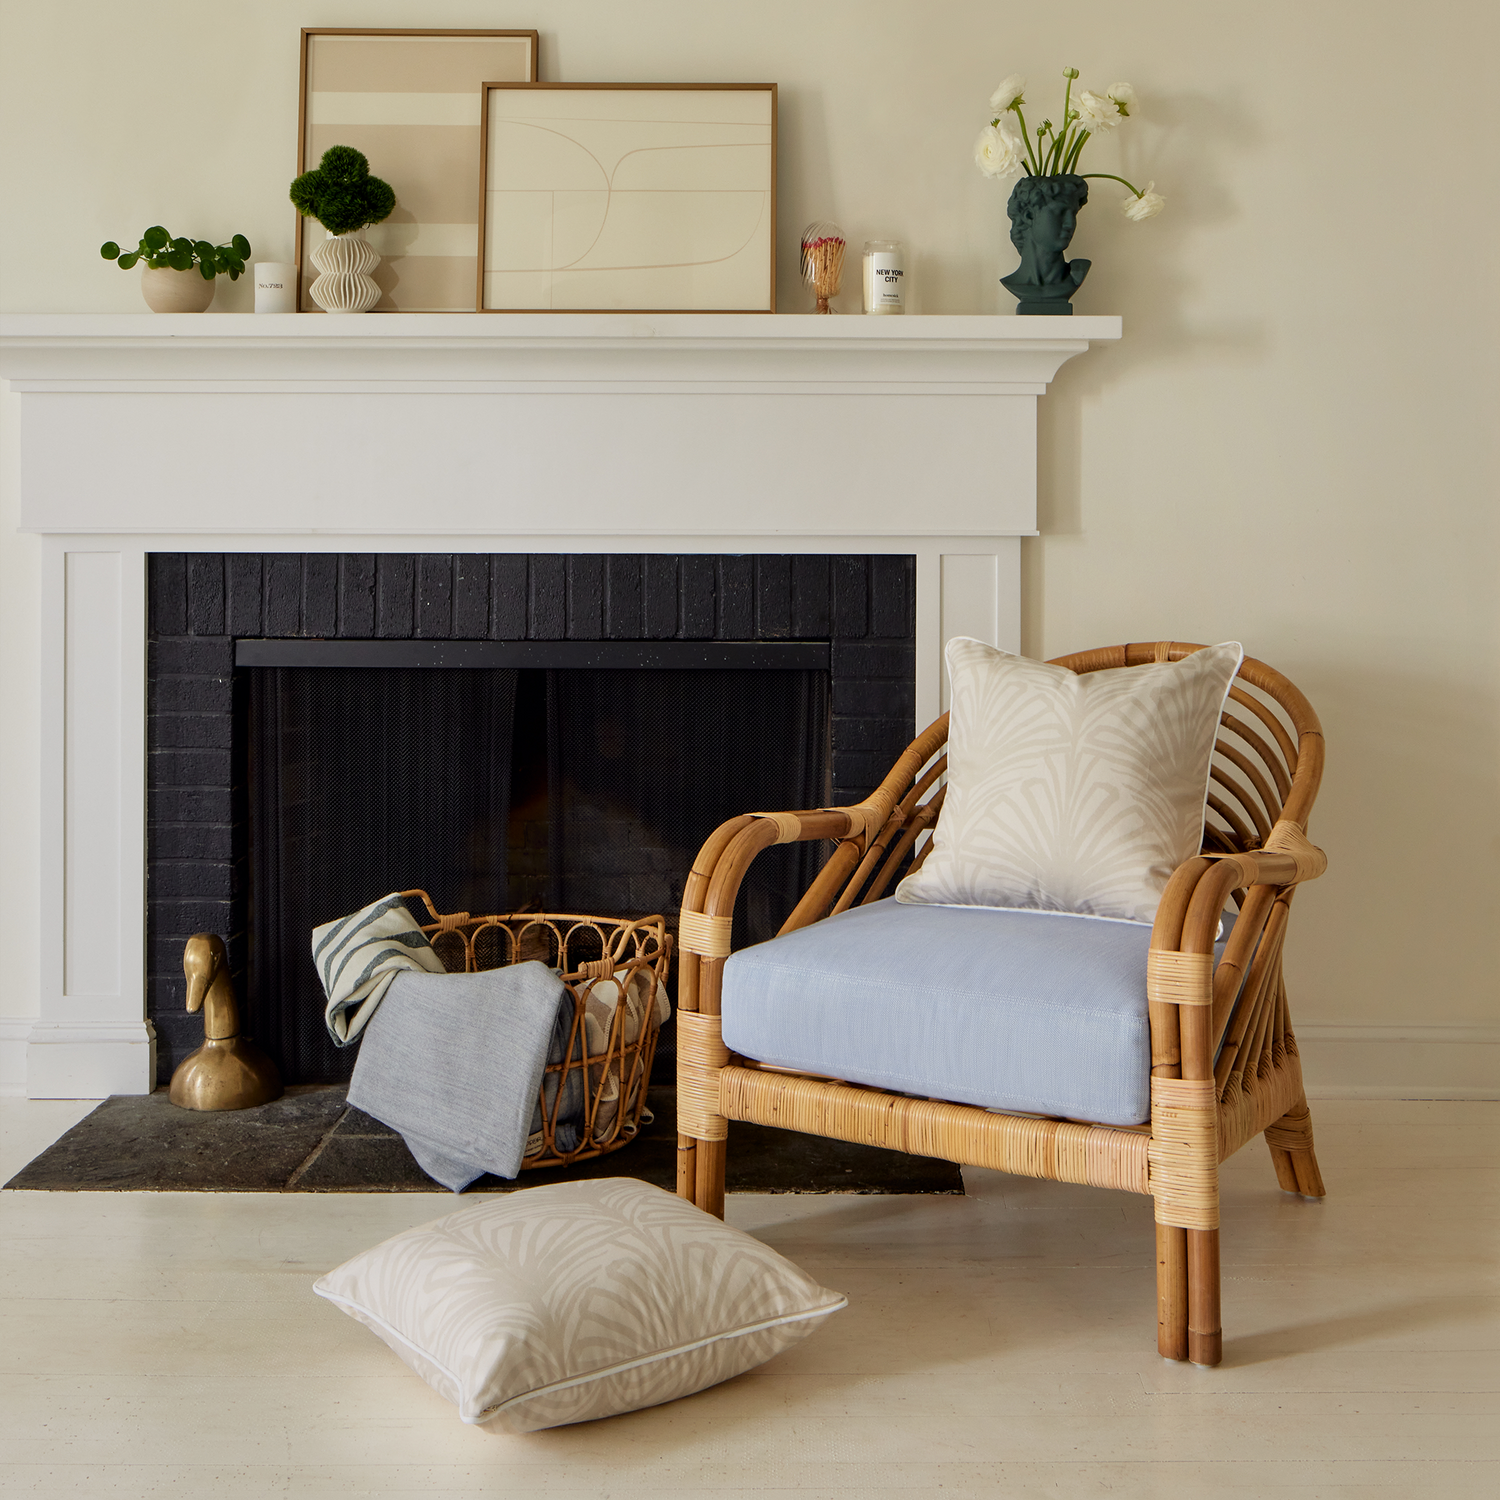 Fireplace styled with one beige palm printed pillow on wooden sofa chair and one beige palm printed pillow on the floor next to basket with blankets inside